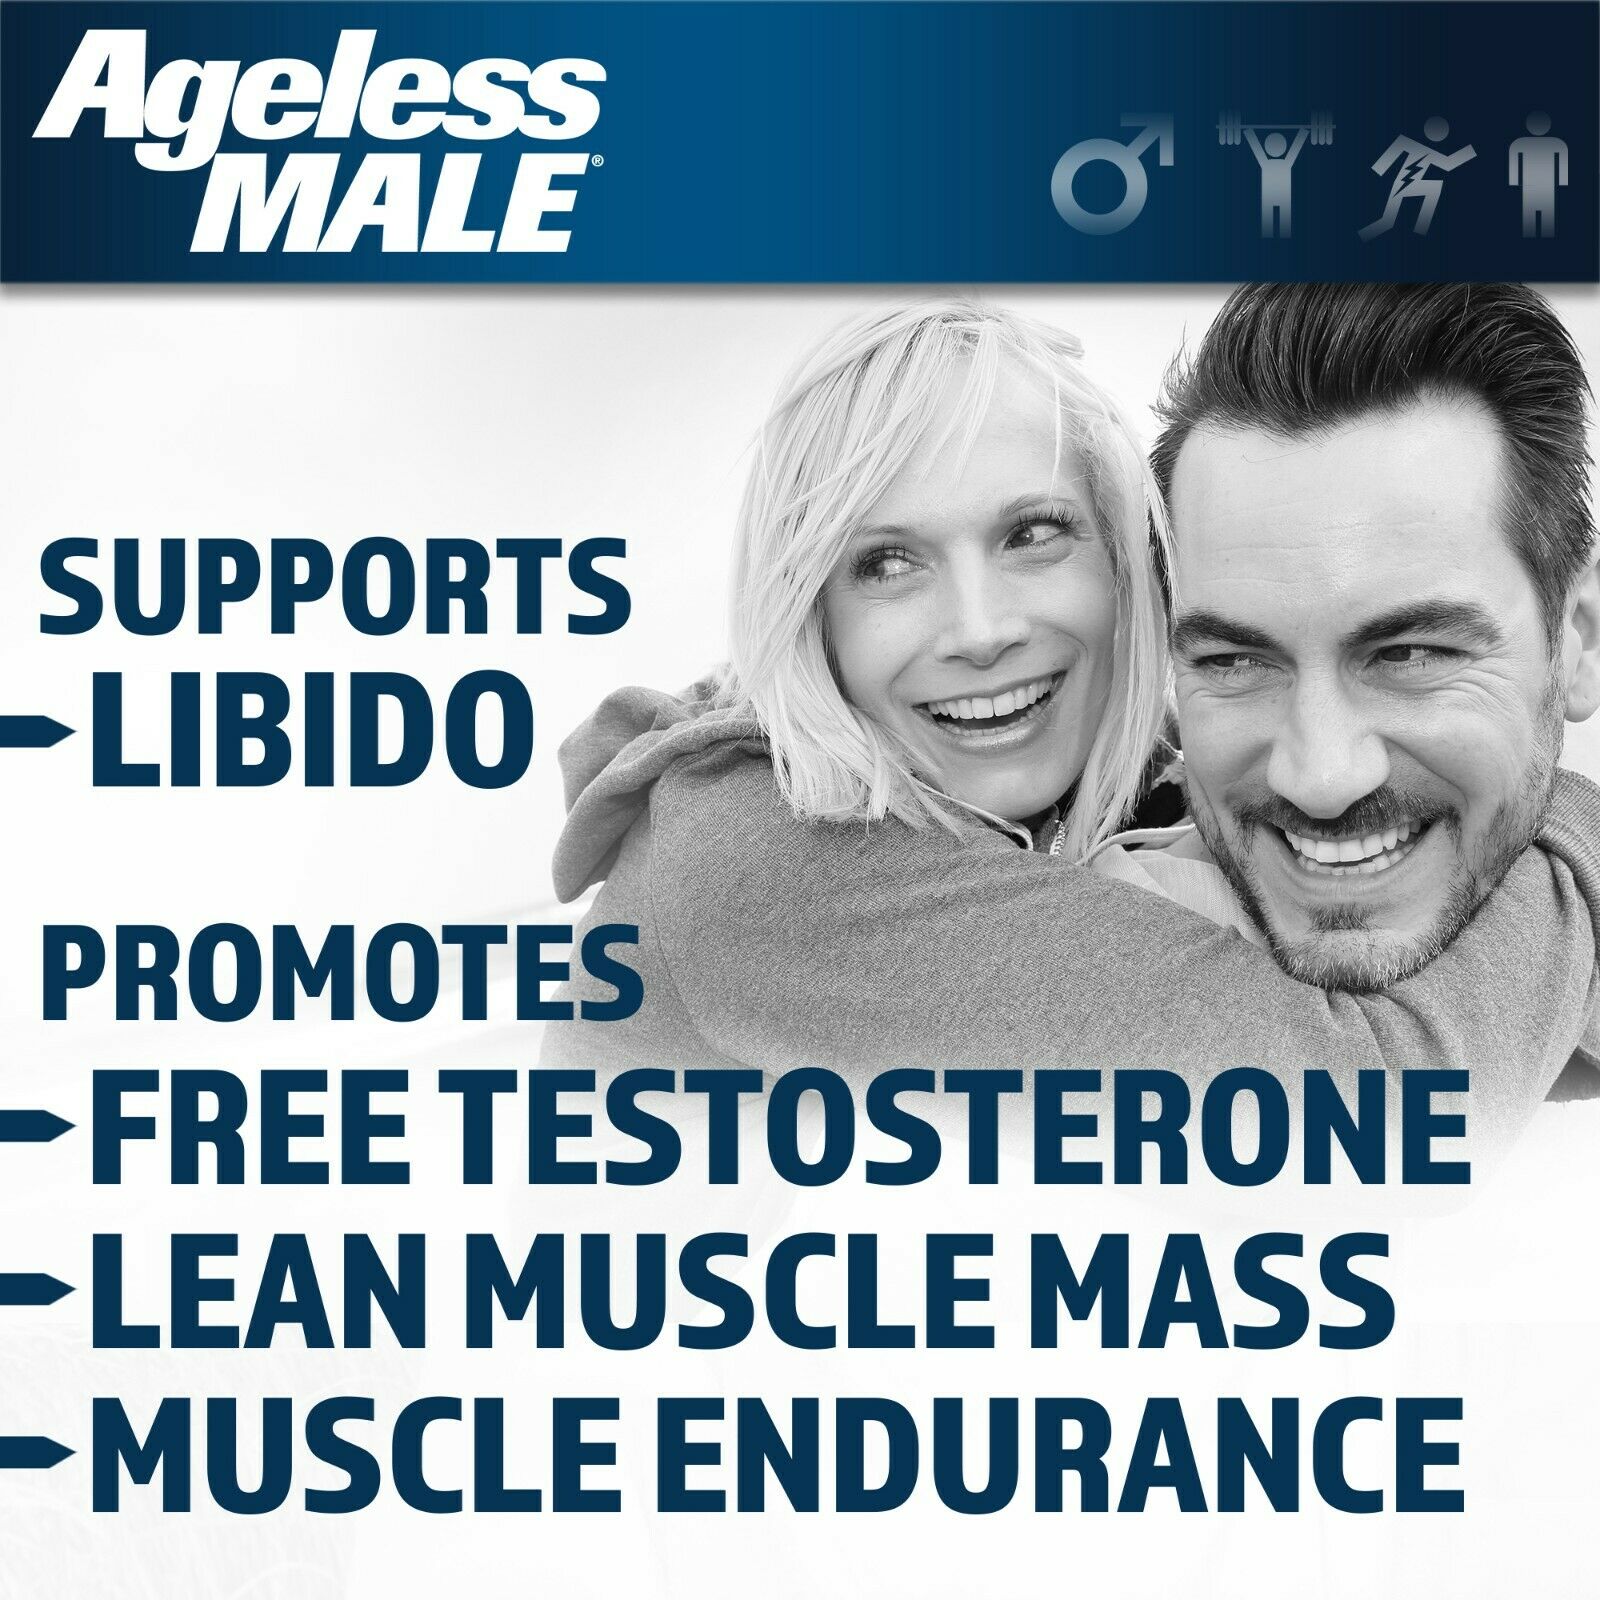 Ageless Male Free Testosterone Booster by New Vitality - NEW - 60 Tablets